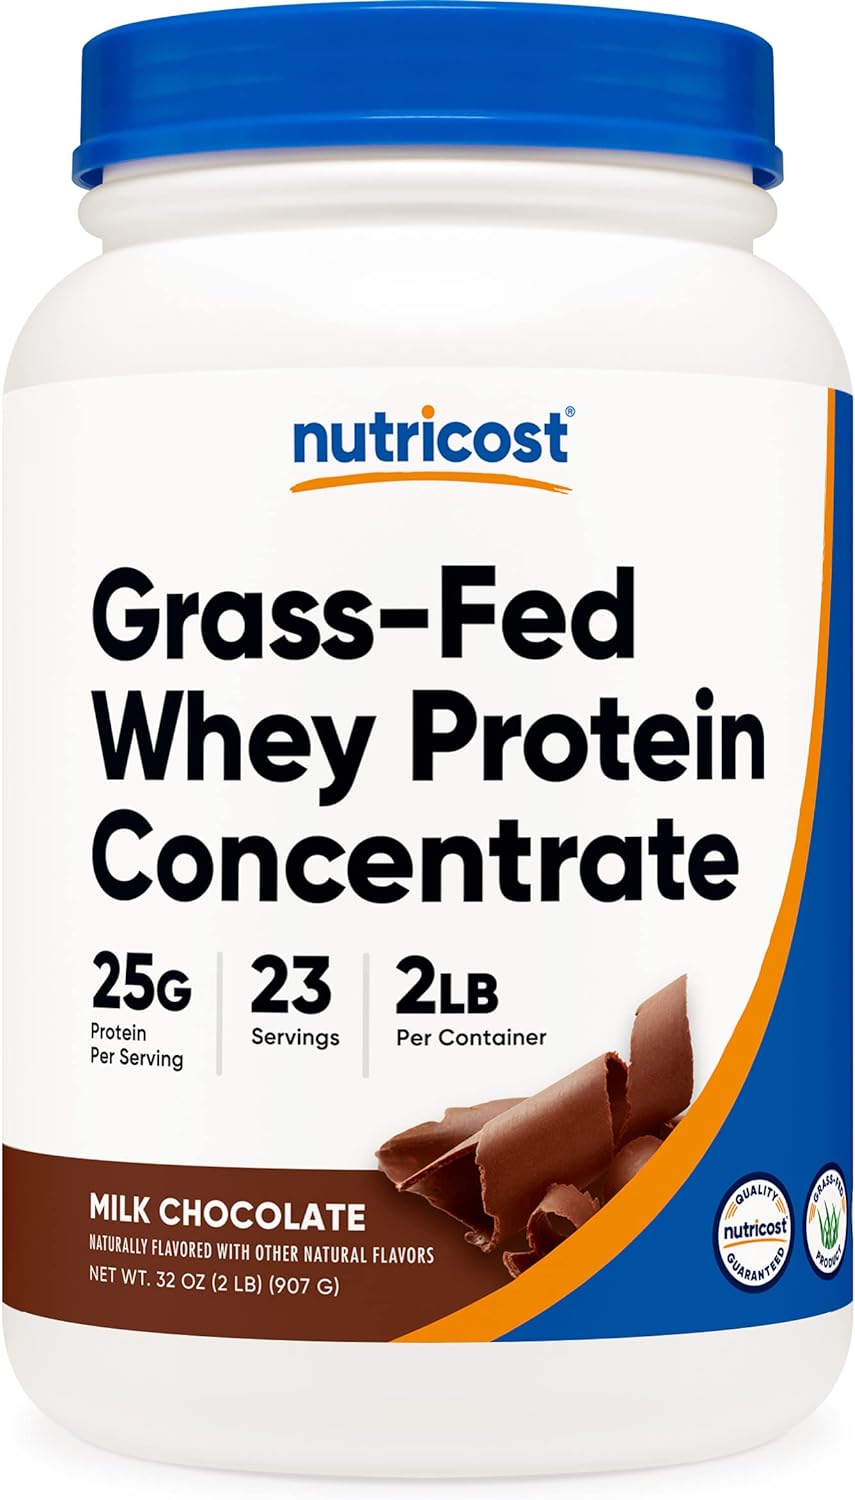 Nutricost Grass-Fed Whey Protein Concentrate (Chocolate) 2LBS - Undena